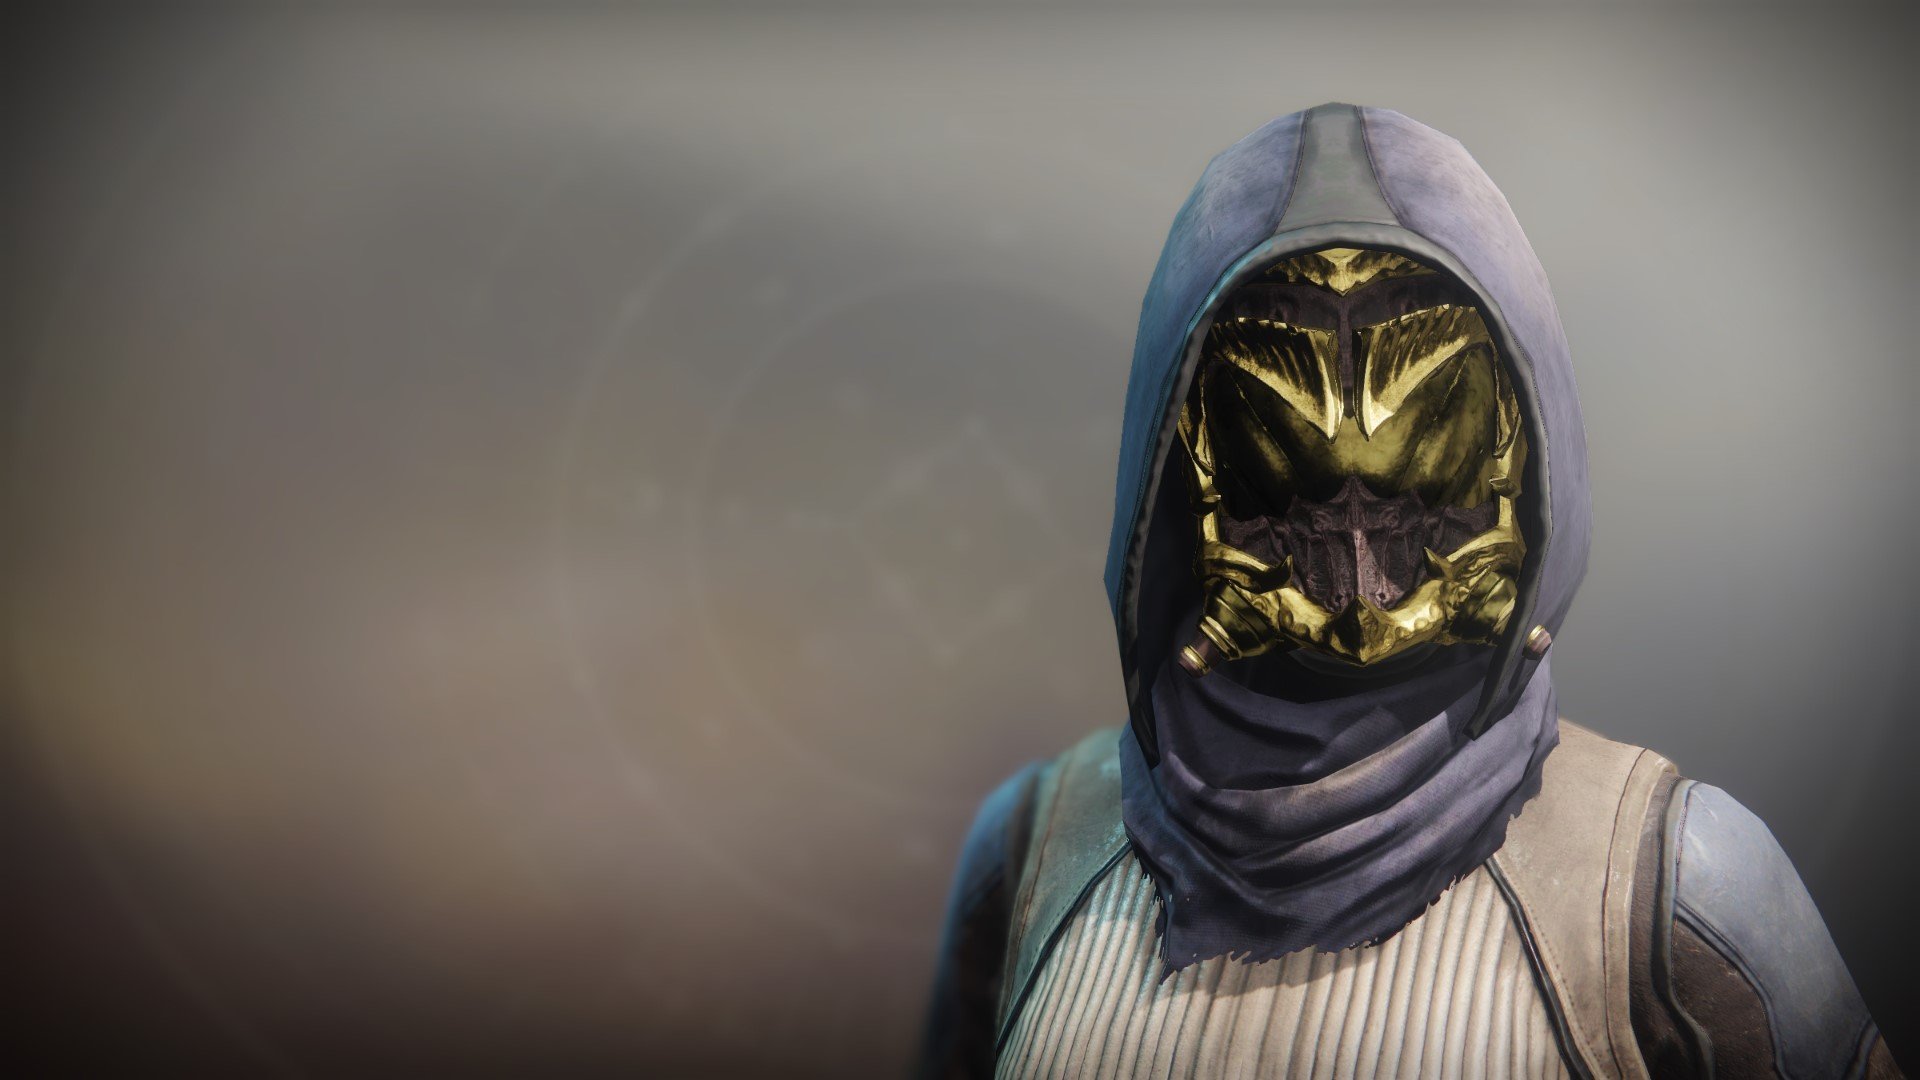 An in-game render of the Wormhusk Crown.